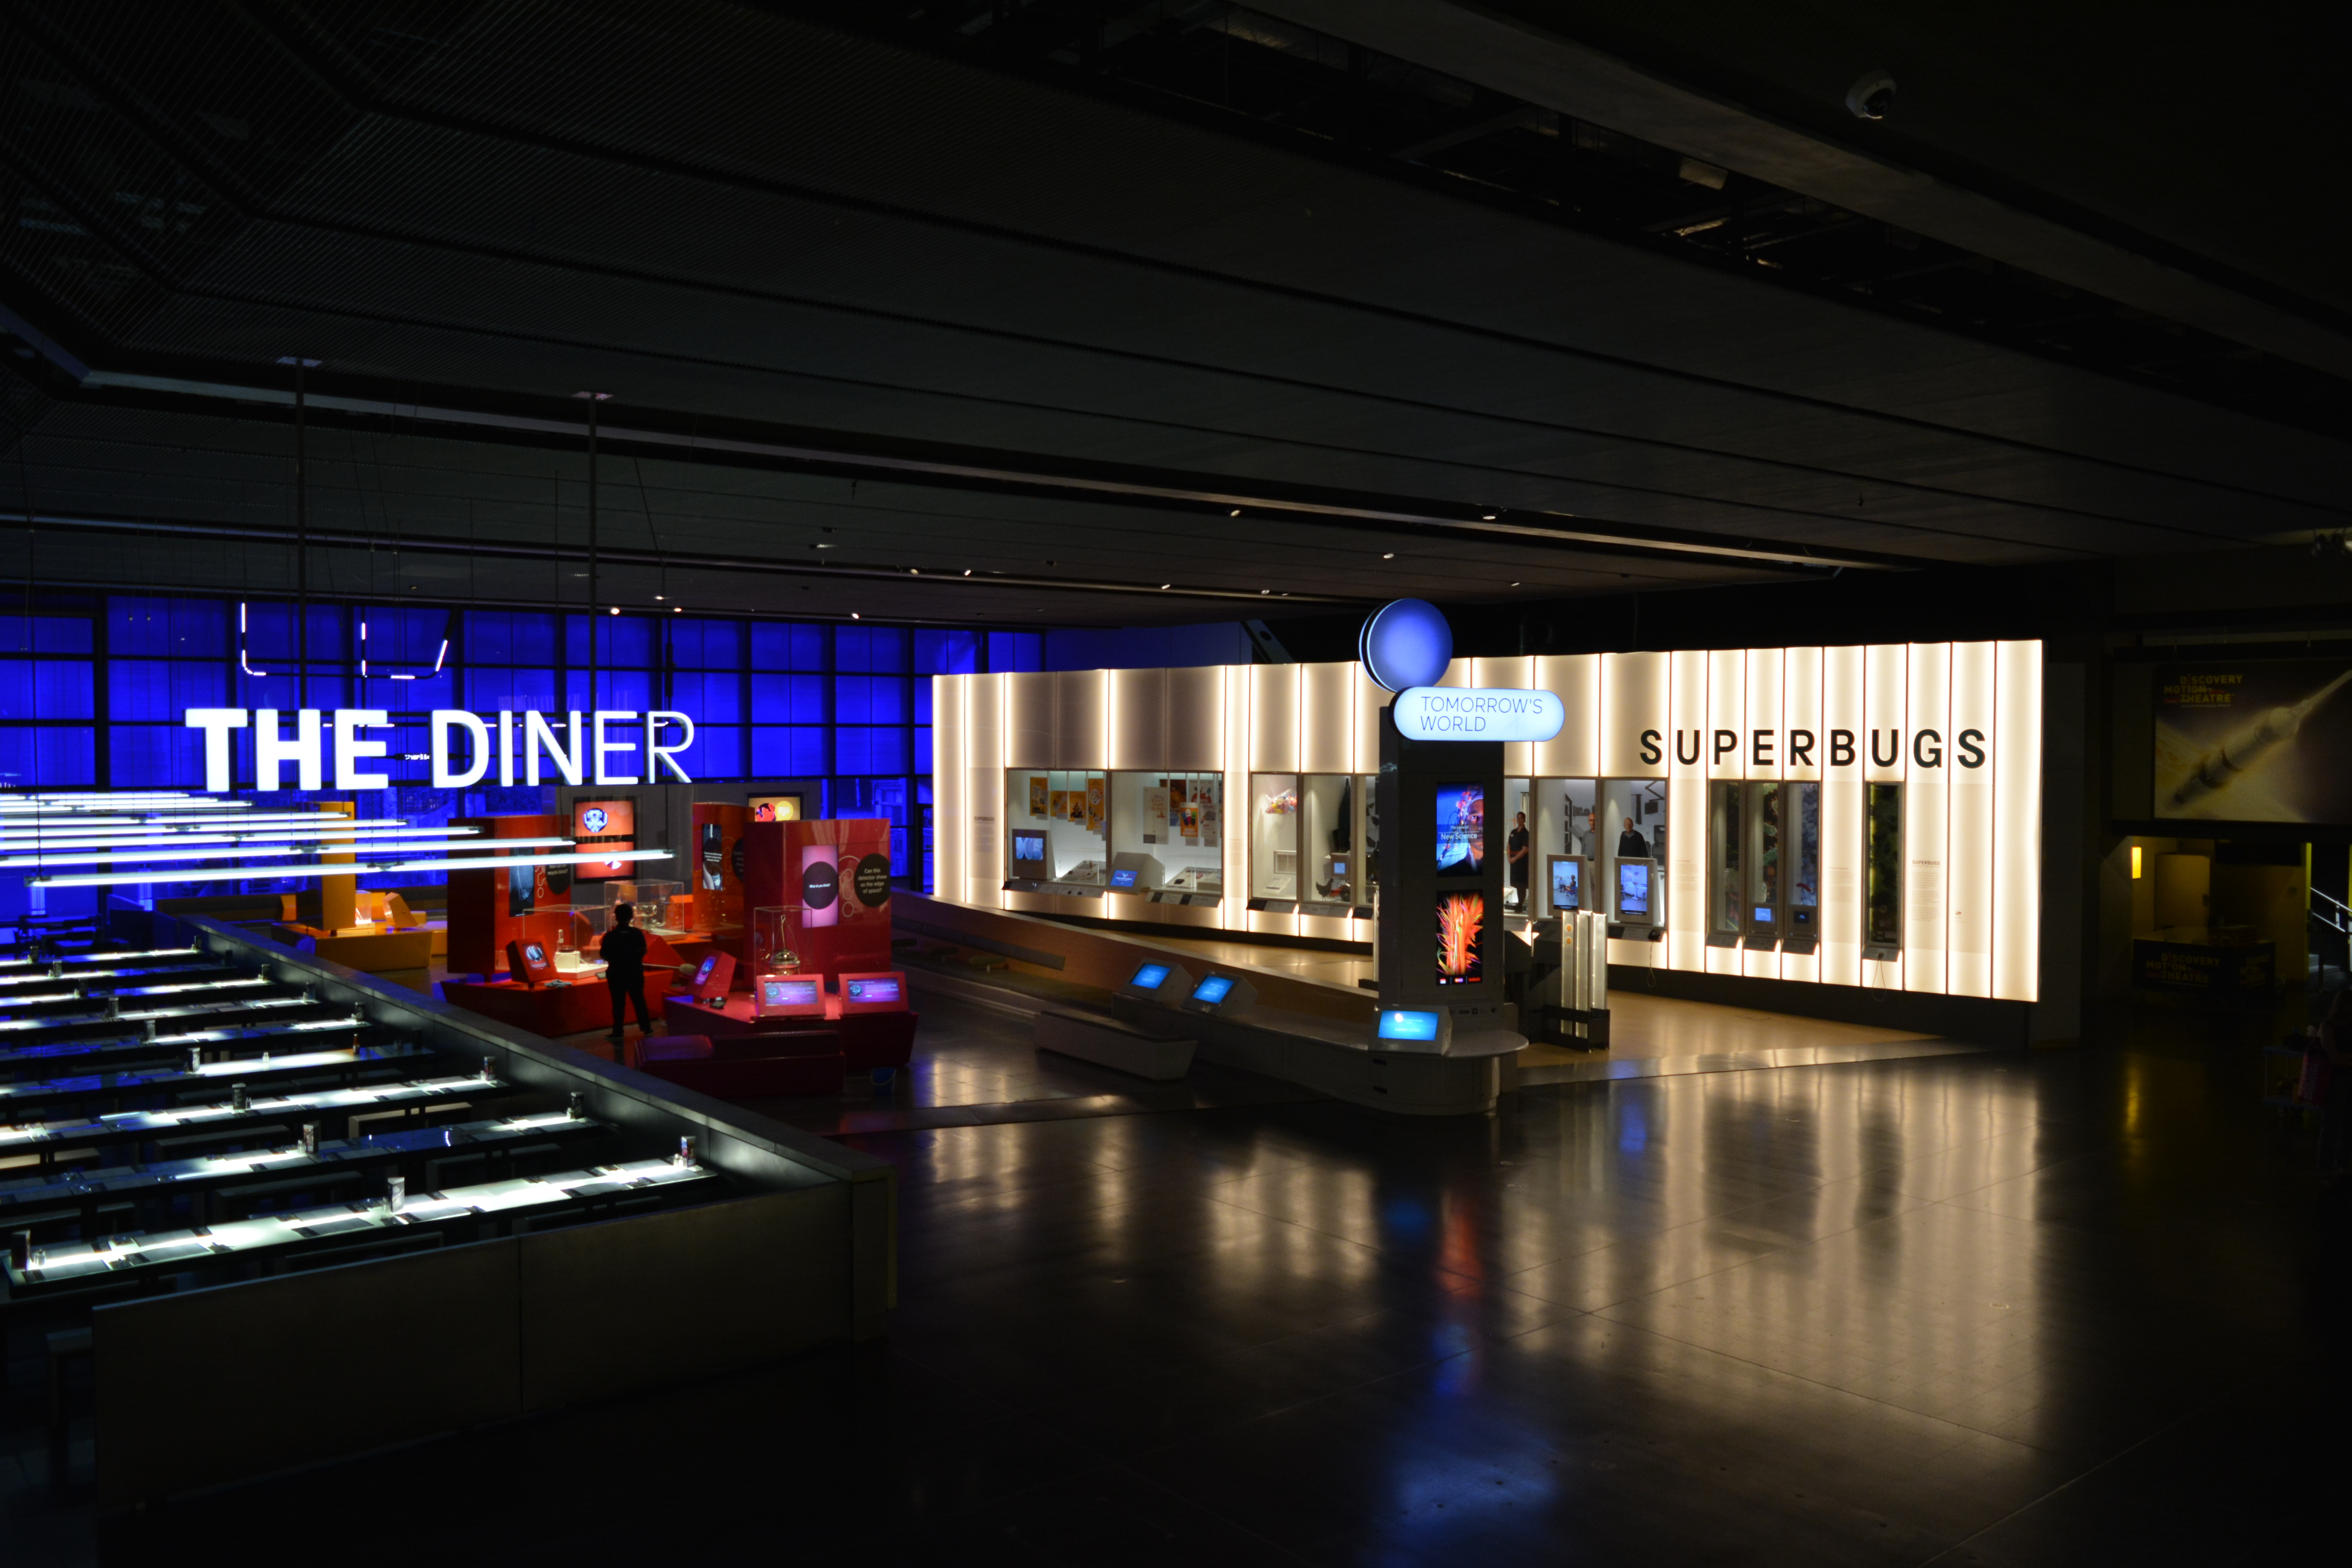 The Diner cafe and Superbugs exhibition on display in Tomorrow's World gallery.